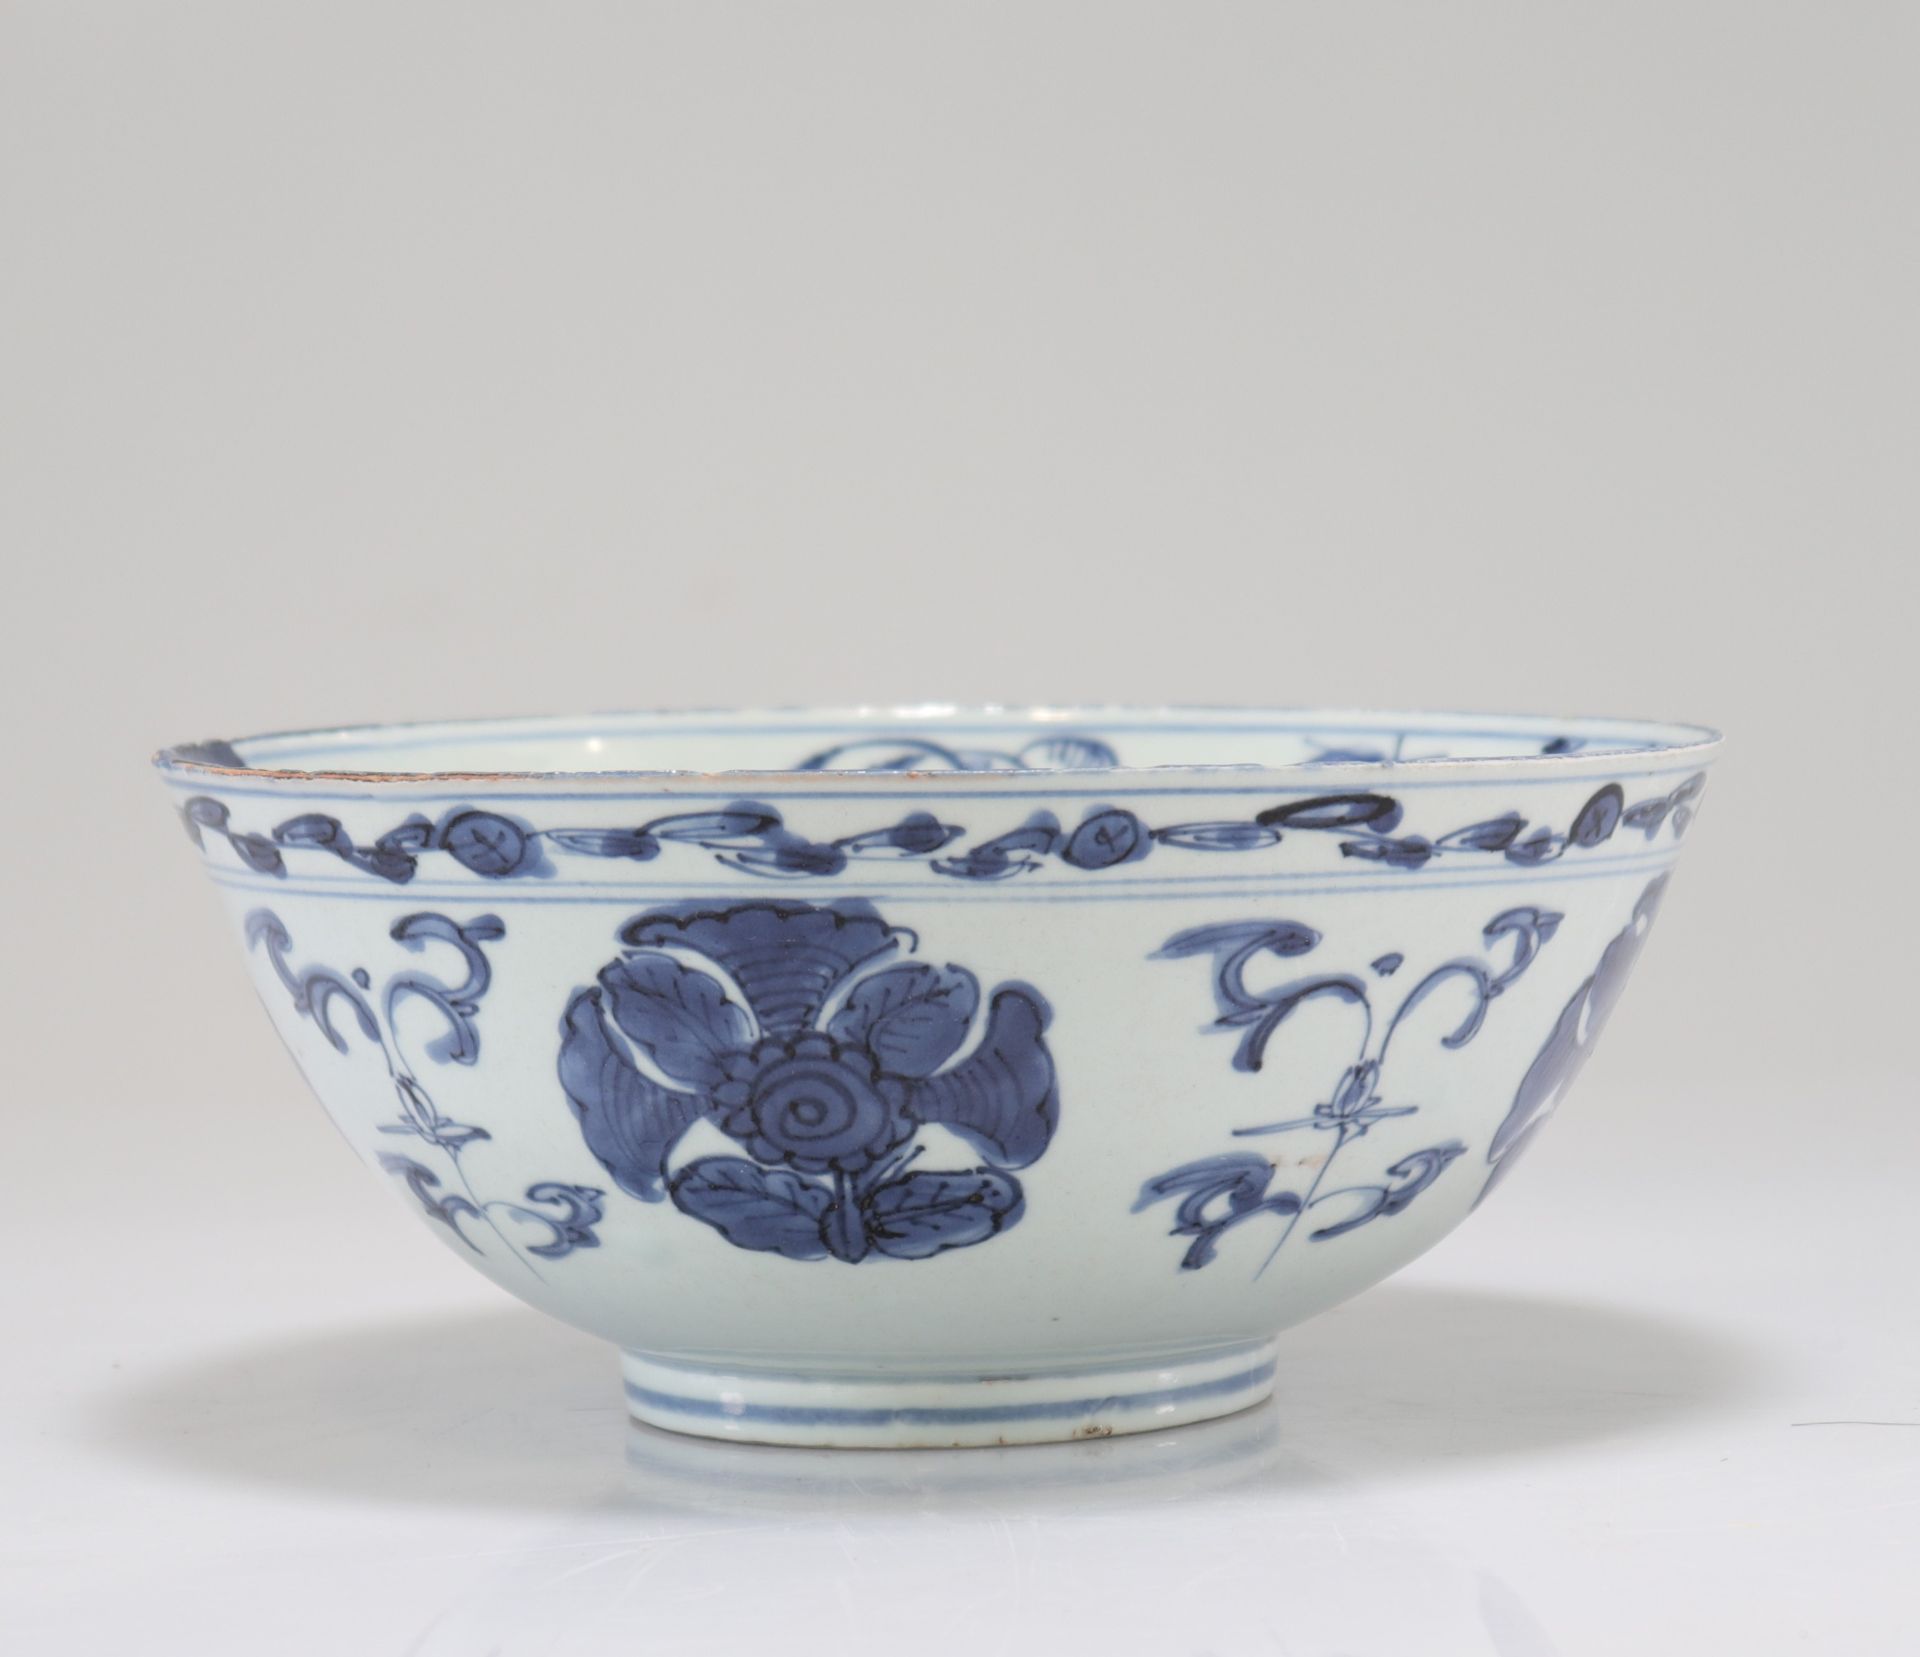 Large "blanc-bleu" porcelain bowl from the Ming period - Image 2 of 6